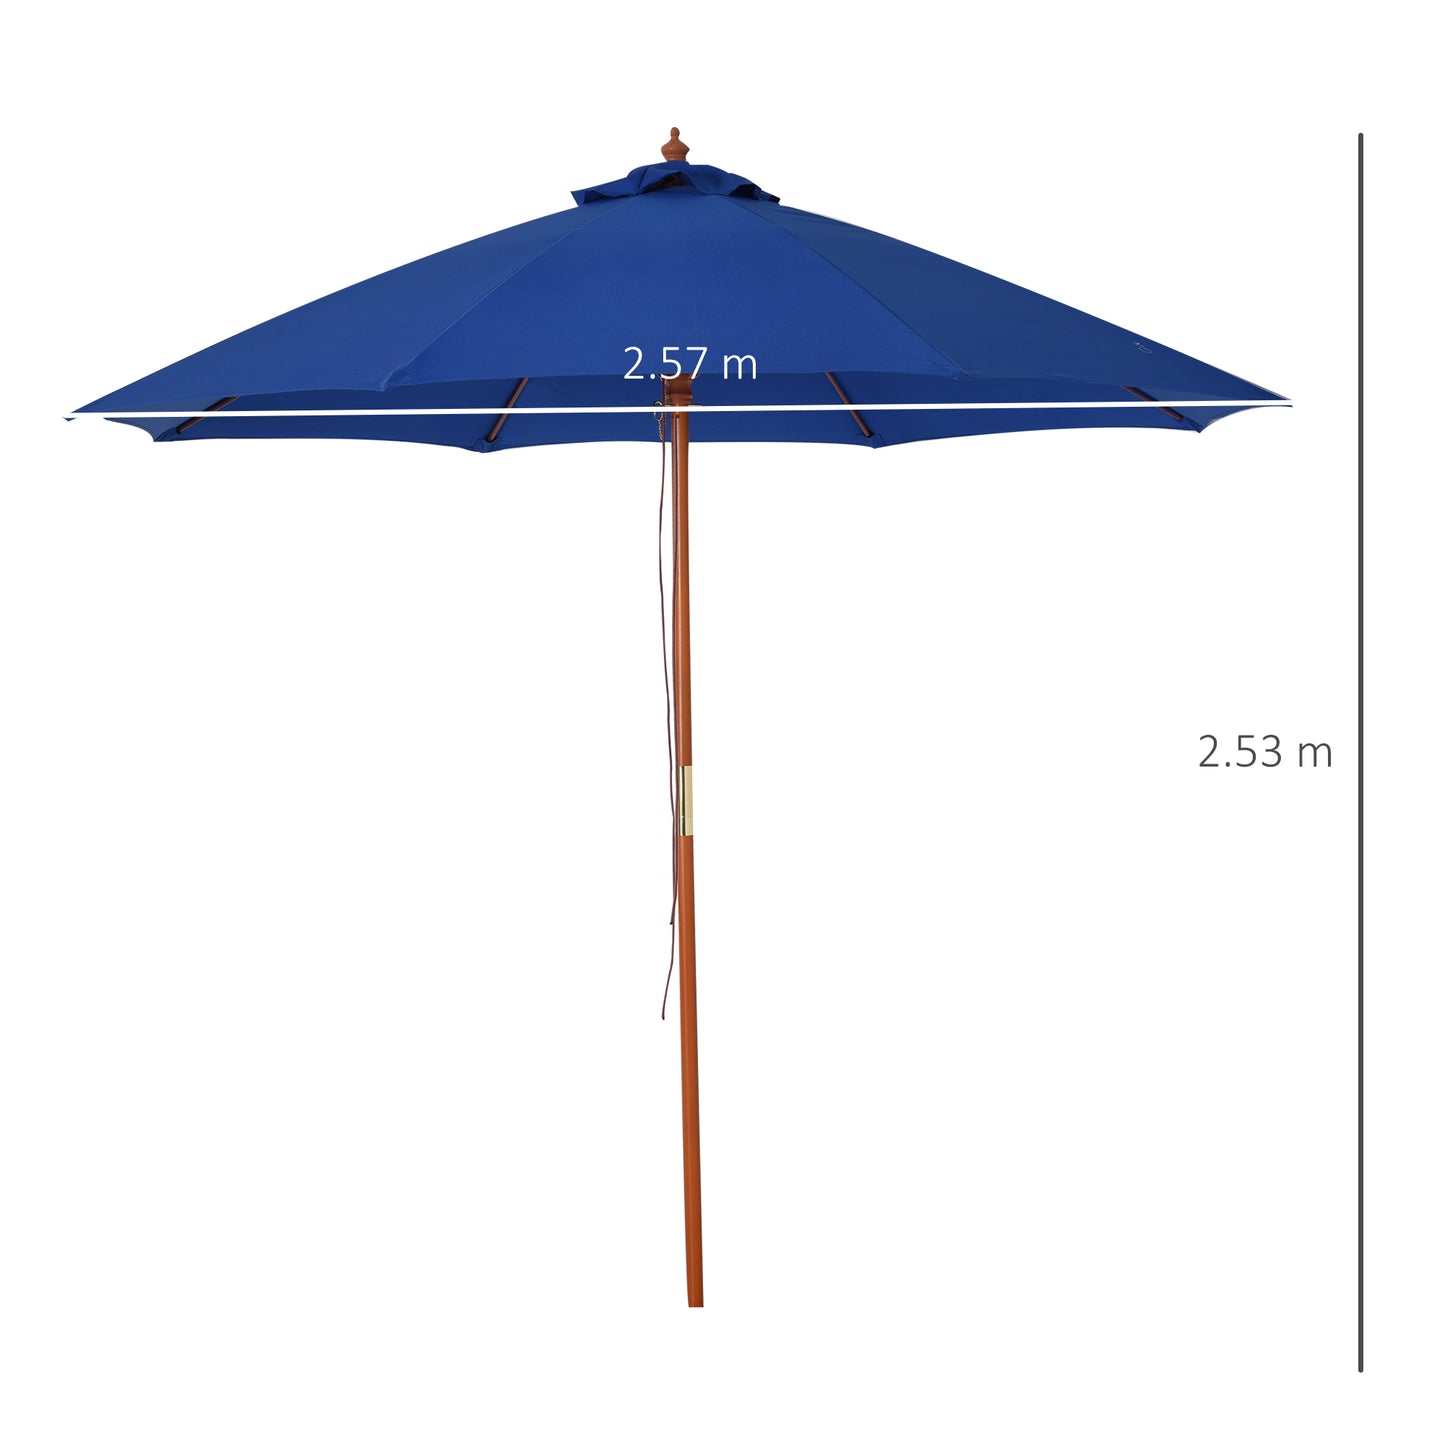 Outsunny 2.5m Wood Garden Parasol Sun Shade Patio Outdoor Market Umbrella Canopy with Top Vent, Blue w/ Vent